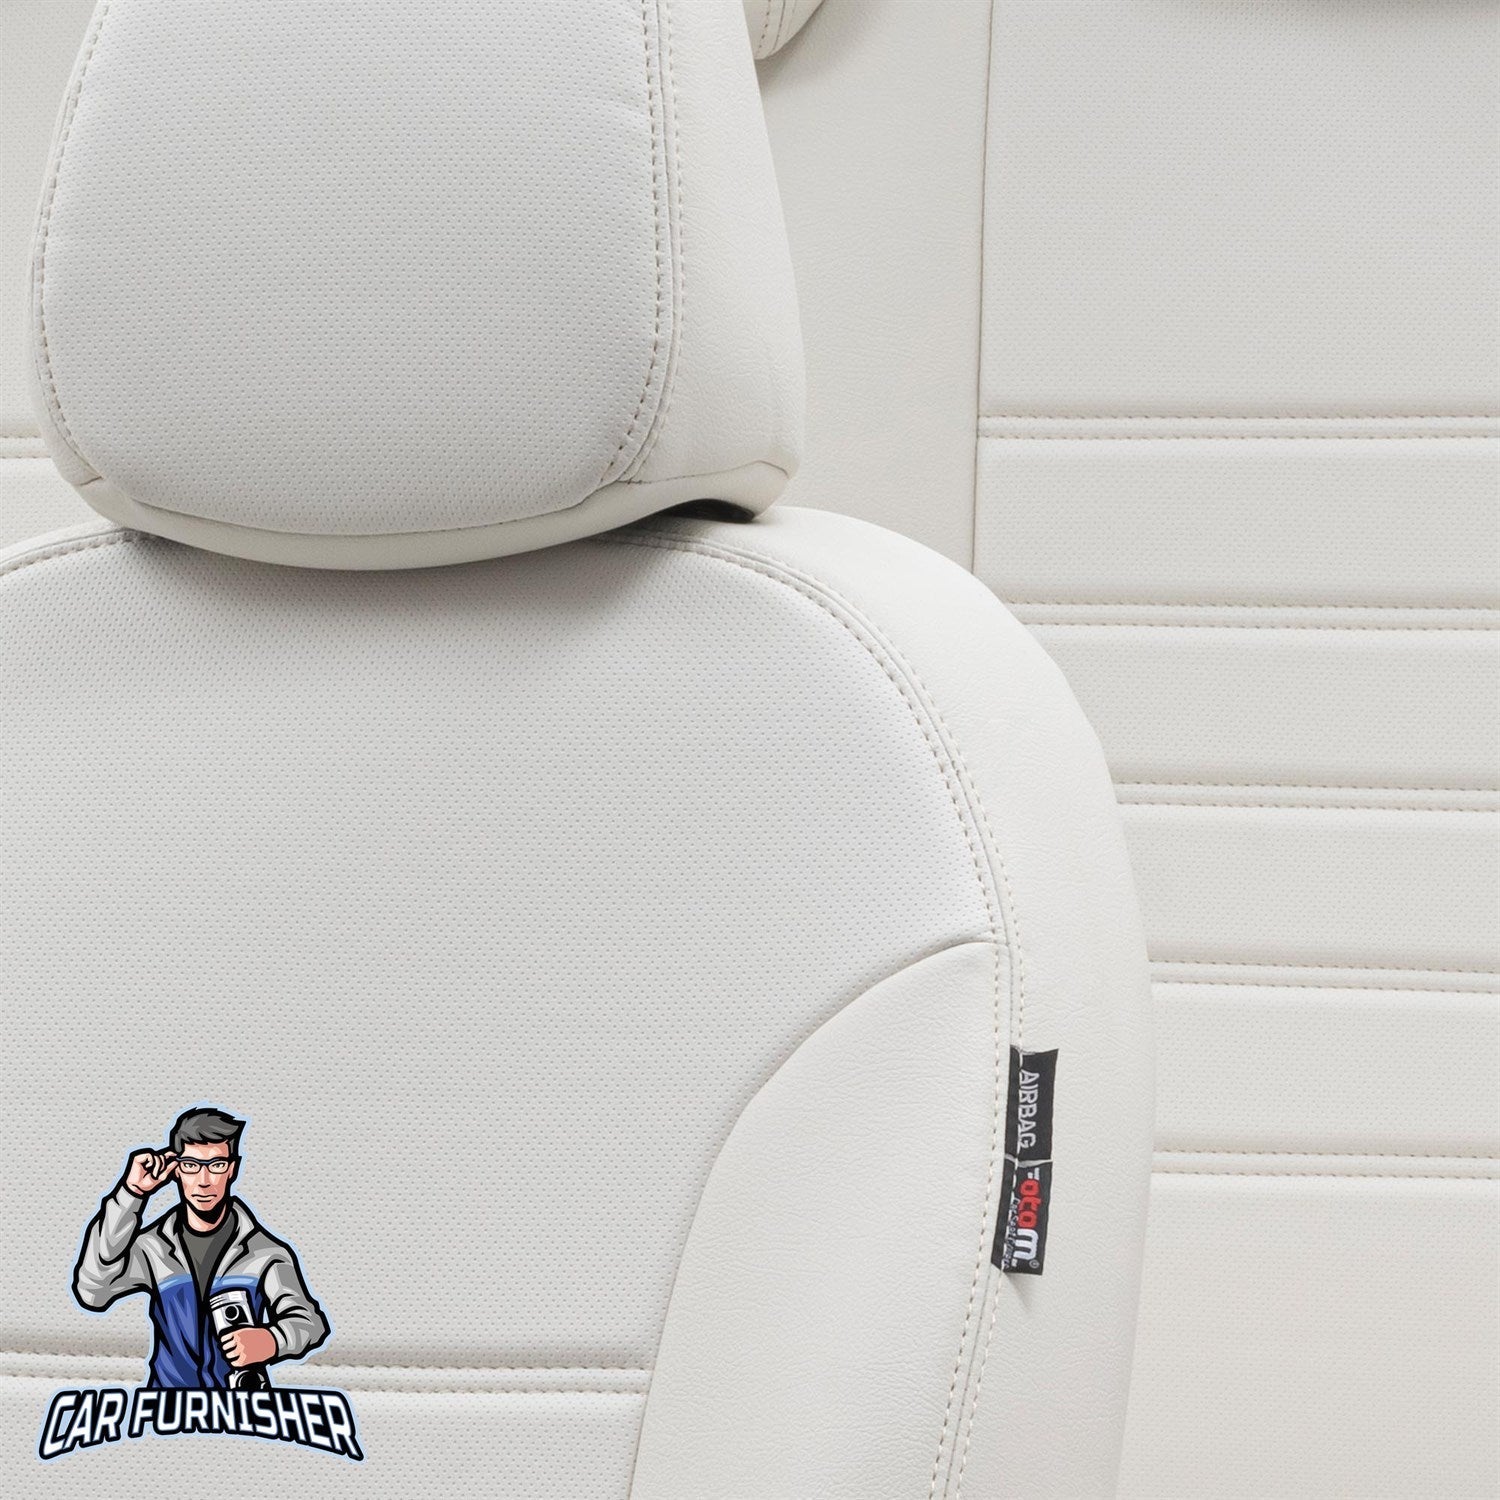 Chevrolet Tahoe Car Seat Covers 2007-2014 GMT/LS/LTZ Istanbul Ivory Full Set (5 Seats + Handrest) Leather & Fabric